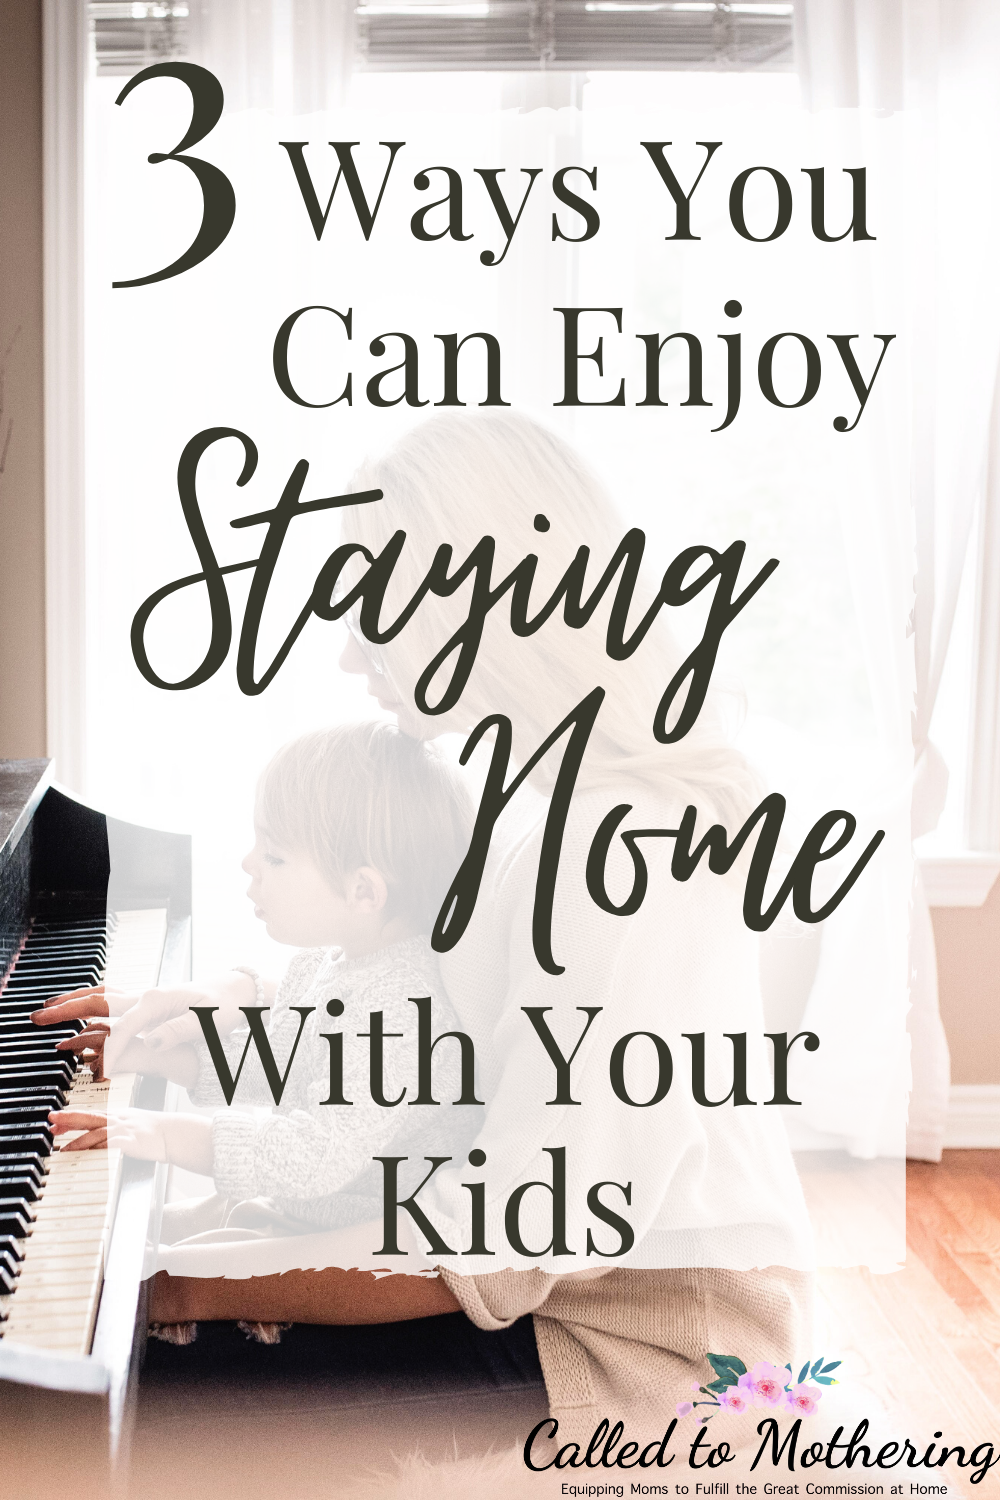 Are you struggling with being a stay-at-home mom? Here are three ways you can not only survive, but enjoy staying home with your kids! #momhacks #stayathomemom #stayinghomewithkids #enjoymotherhood